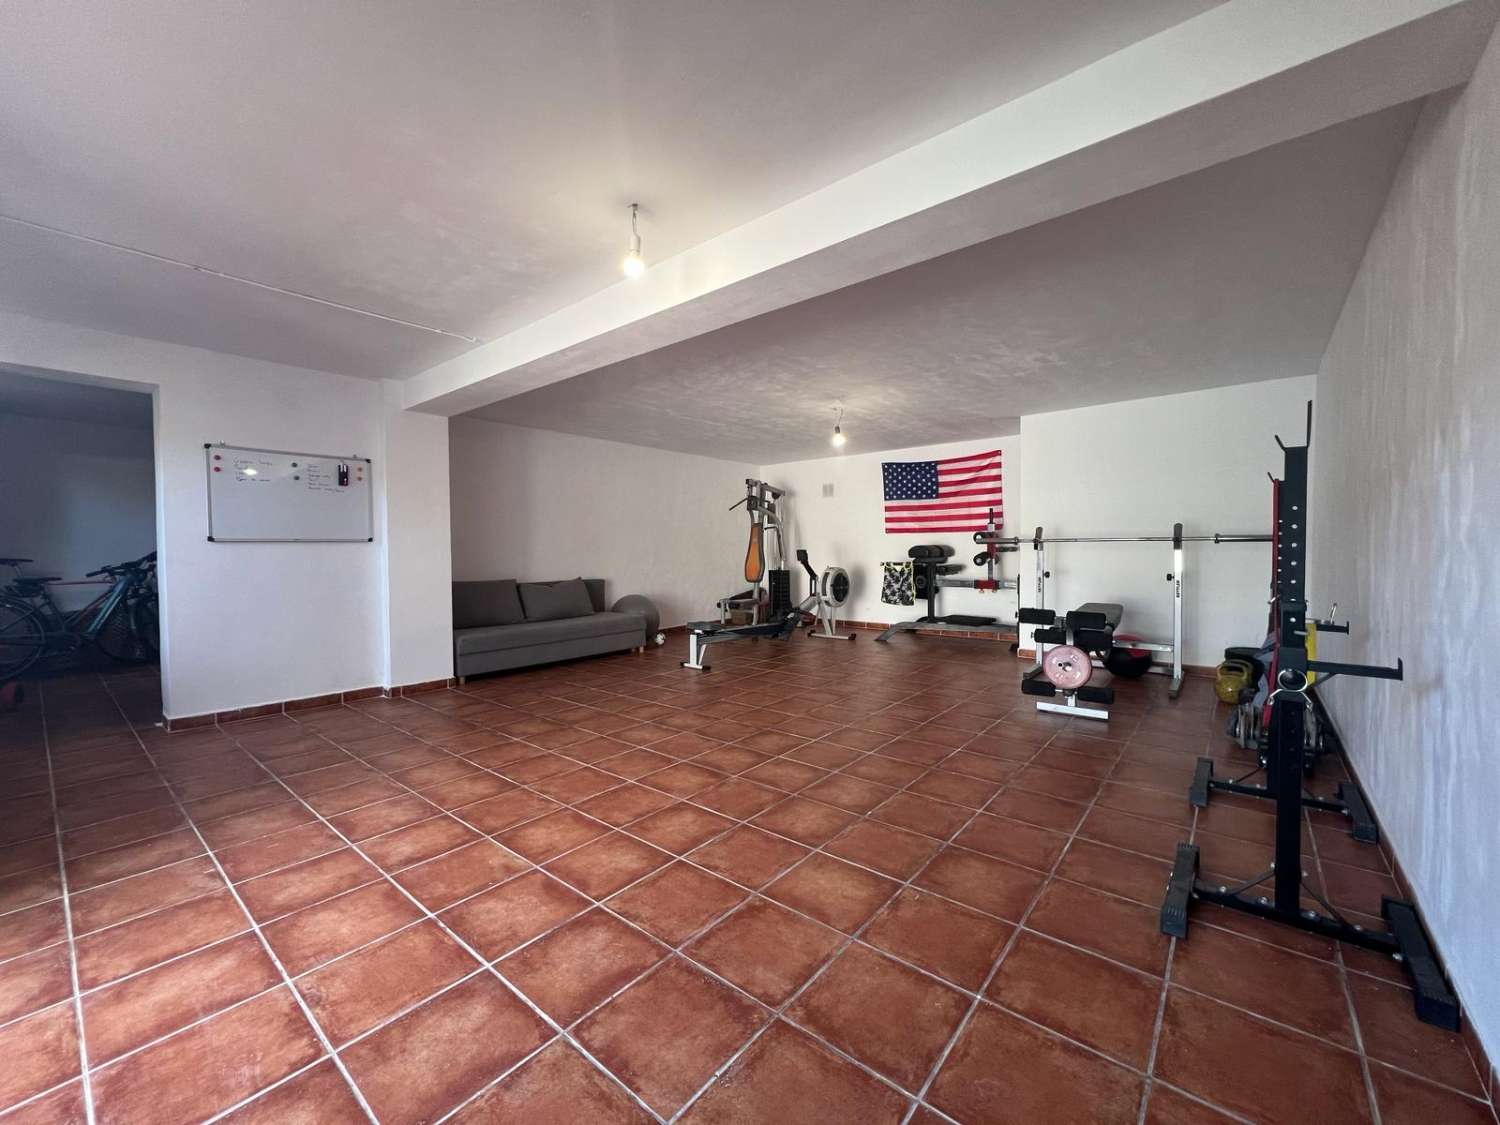 VILLA IN MORAIRA SOL PARK, FLAT WALKING DISTANCE TO THE TOWN AND BEACH, FOR SALE